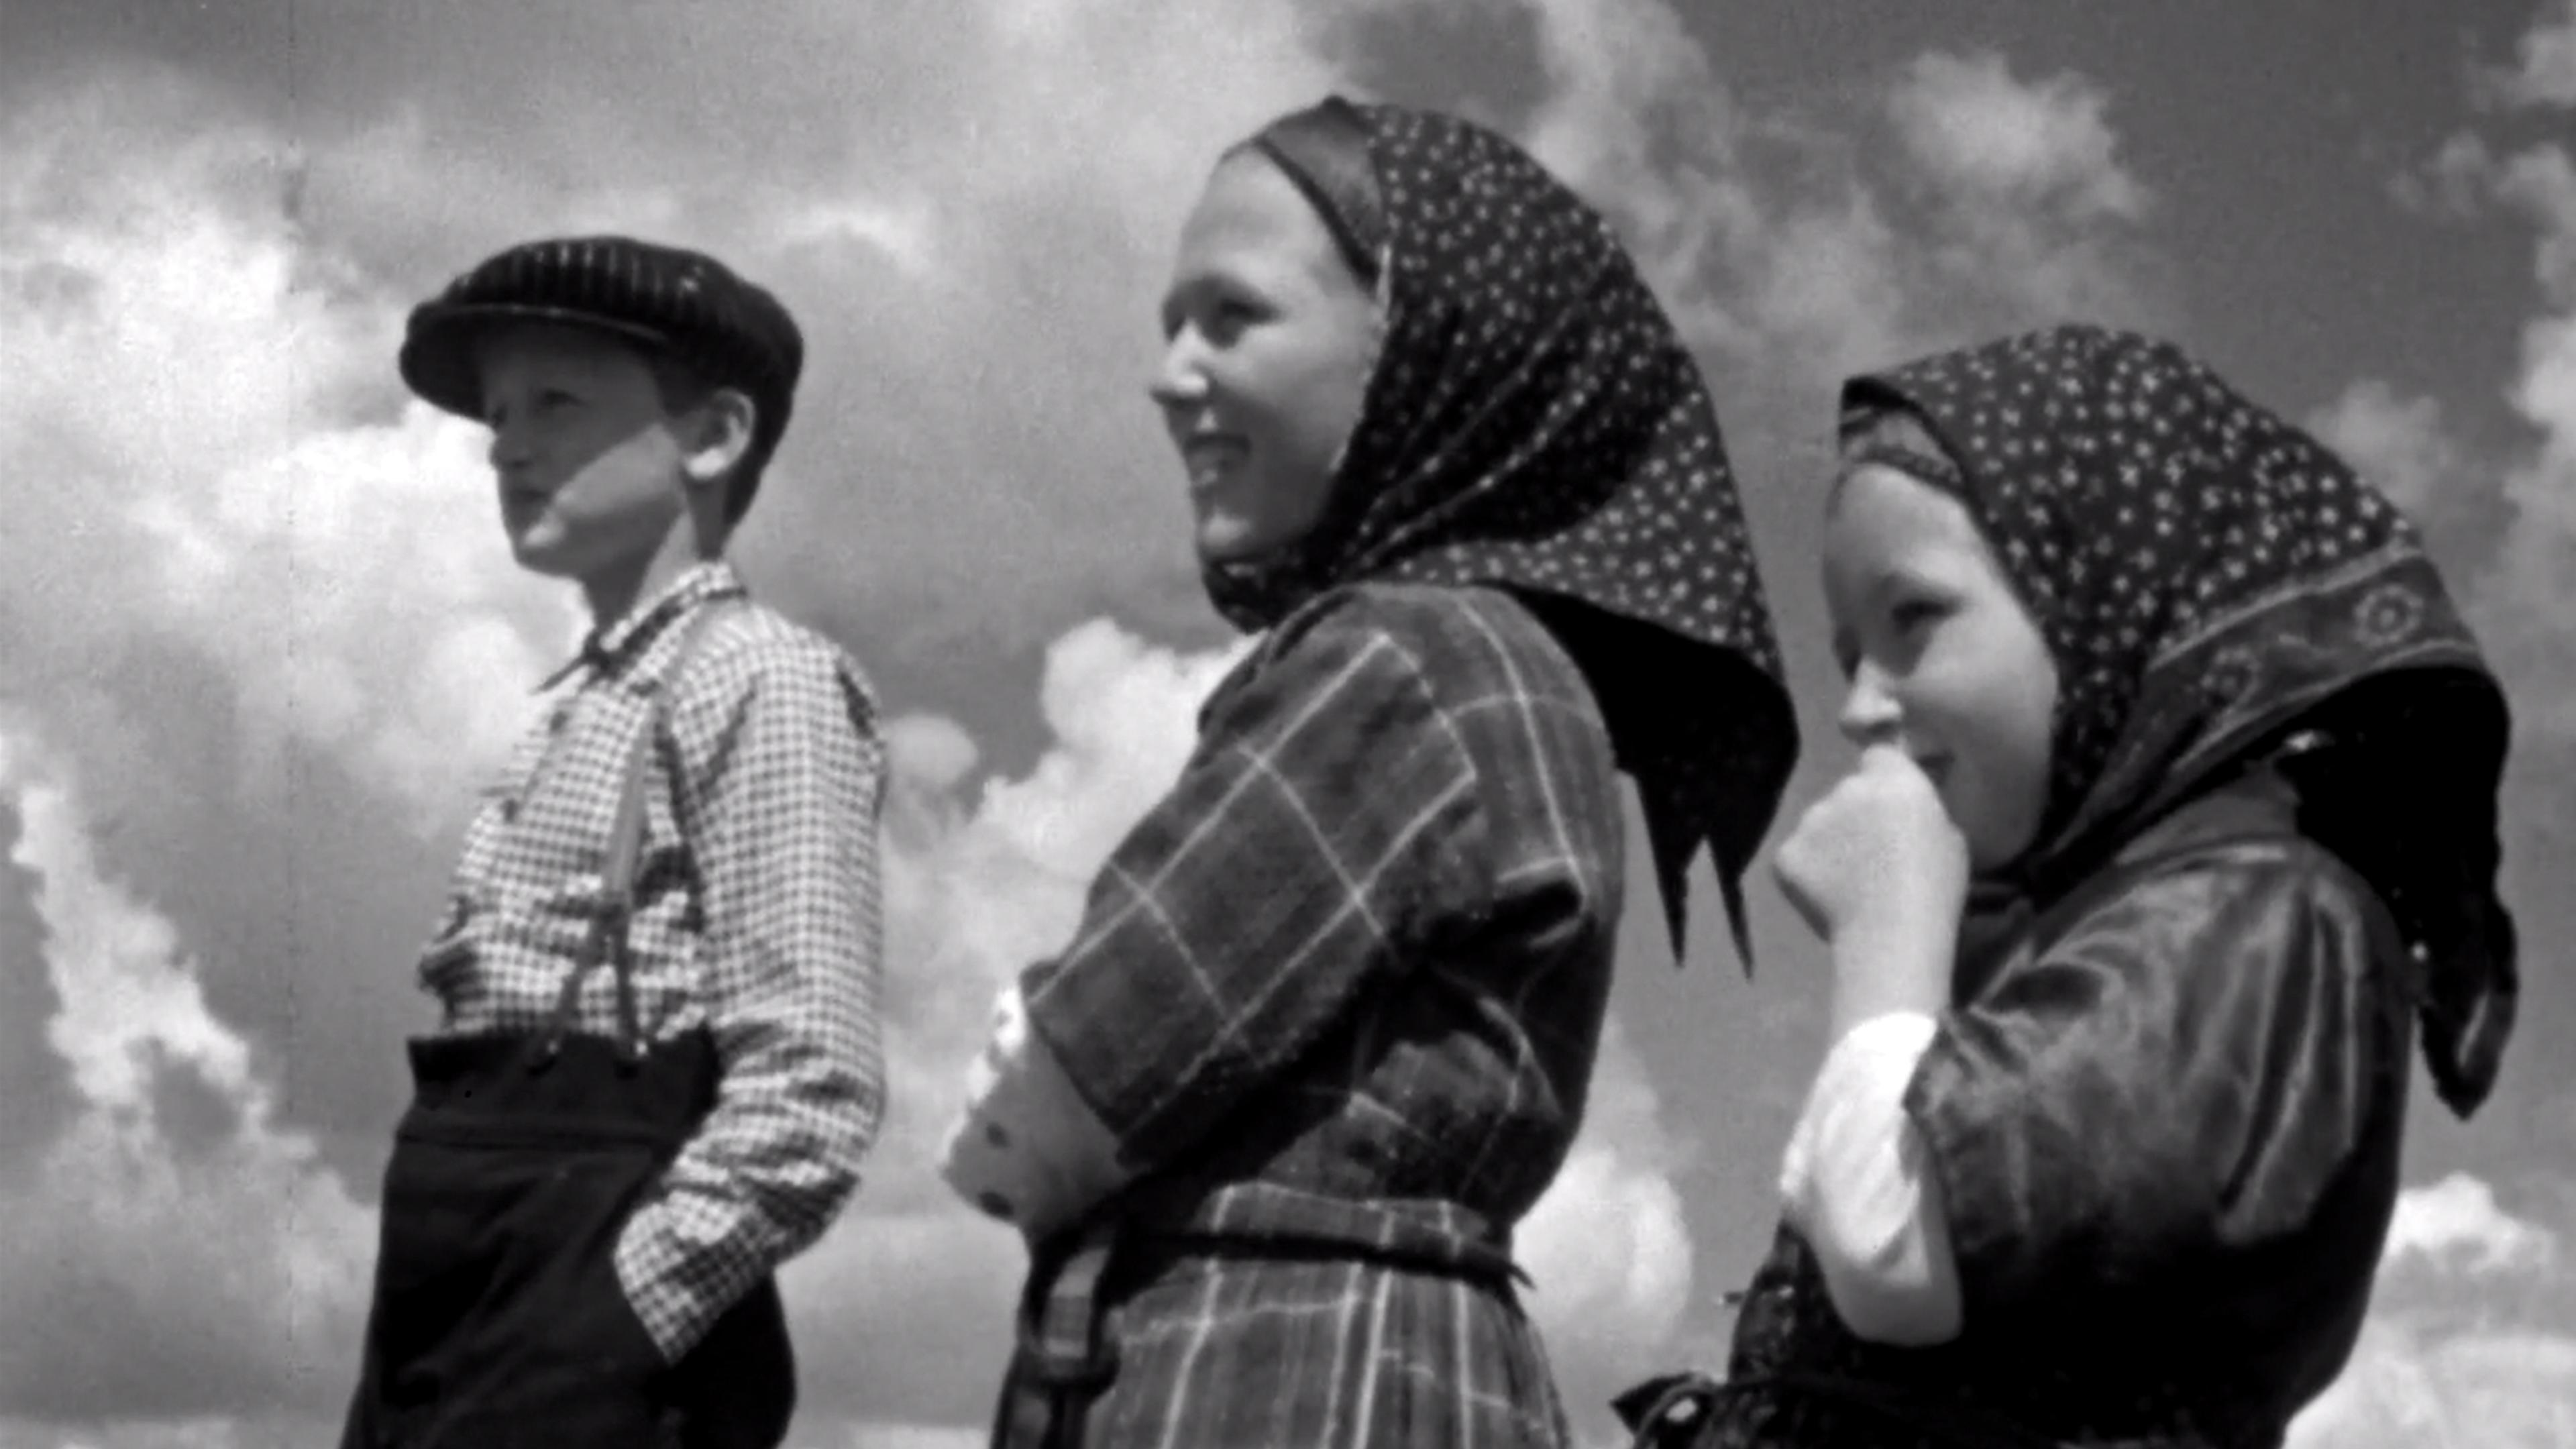 Black and white photo of three children standing outdoors under a cloudy sky. The boy on the left wears a flat cap and checked shirt with trousers, while the two girls on the right wear patterned headscarves and dresses, smiling and looking into the distance.